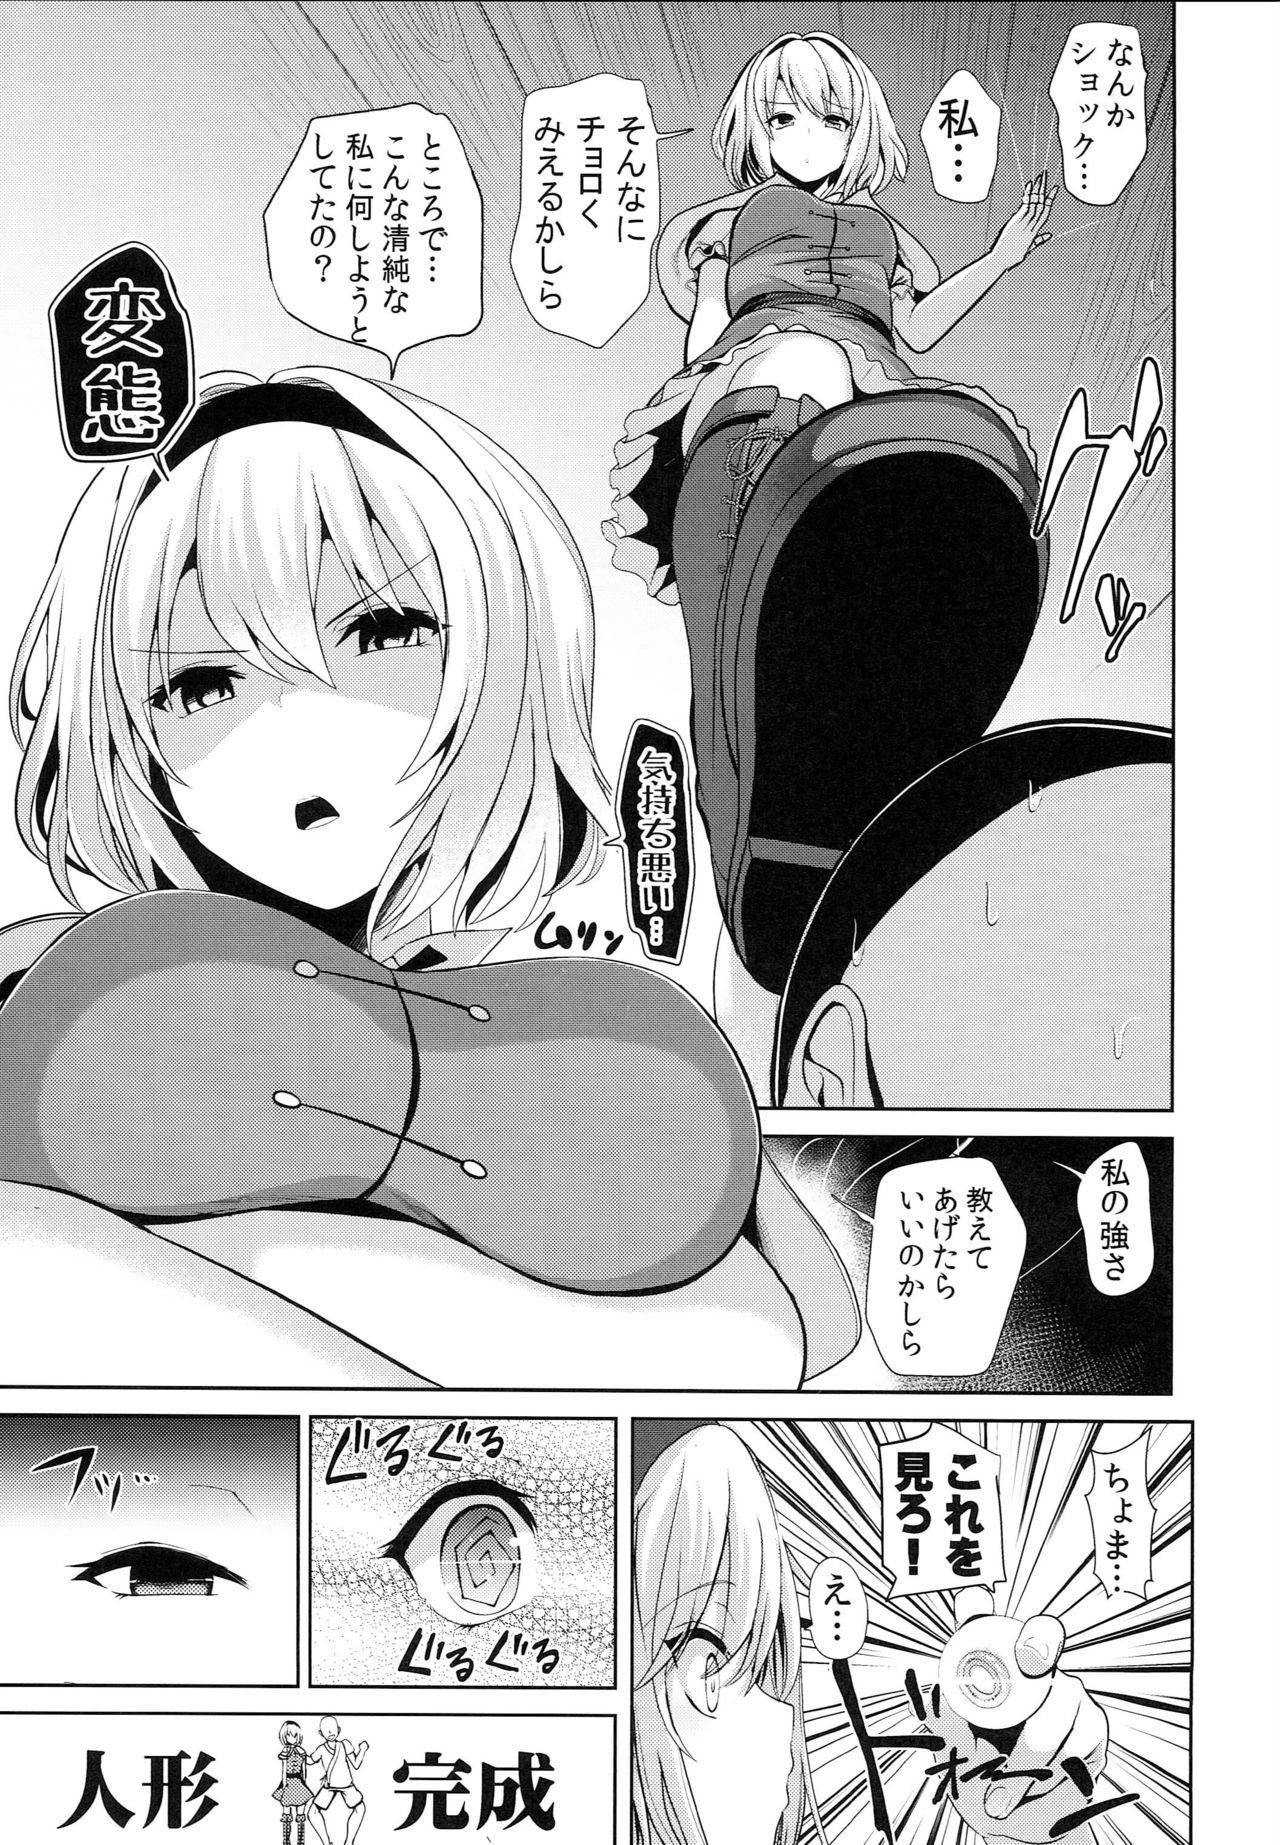 Cowgirl Touhou Saimin 3 Nandemo Alice - Touhou project Gay Fetish - Page 5